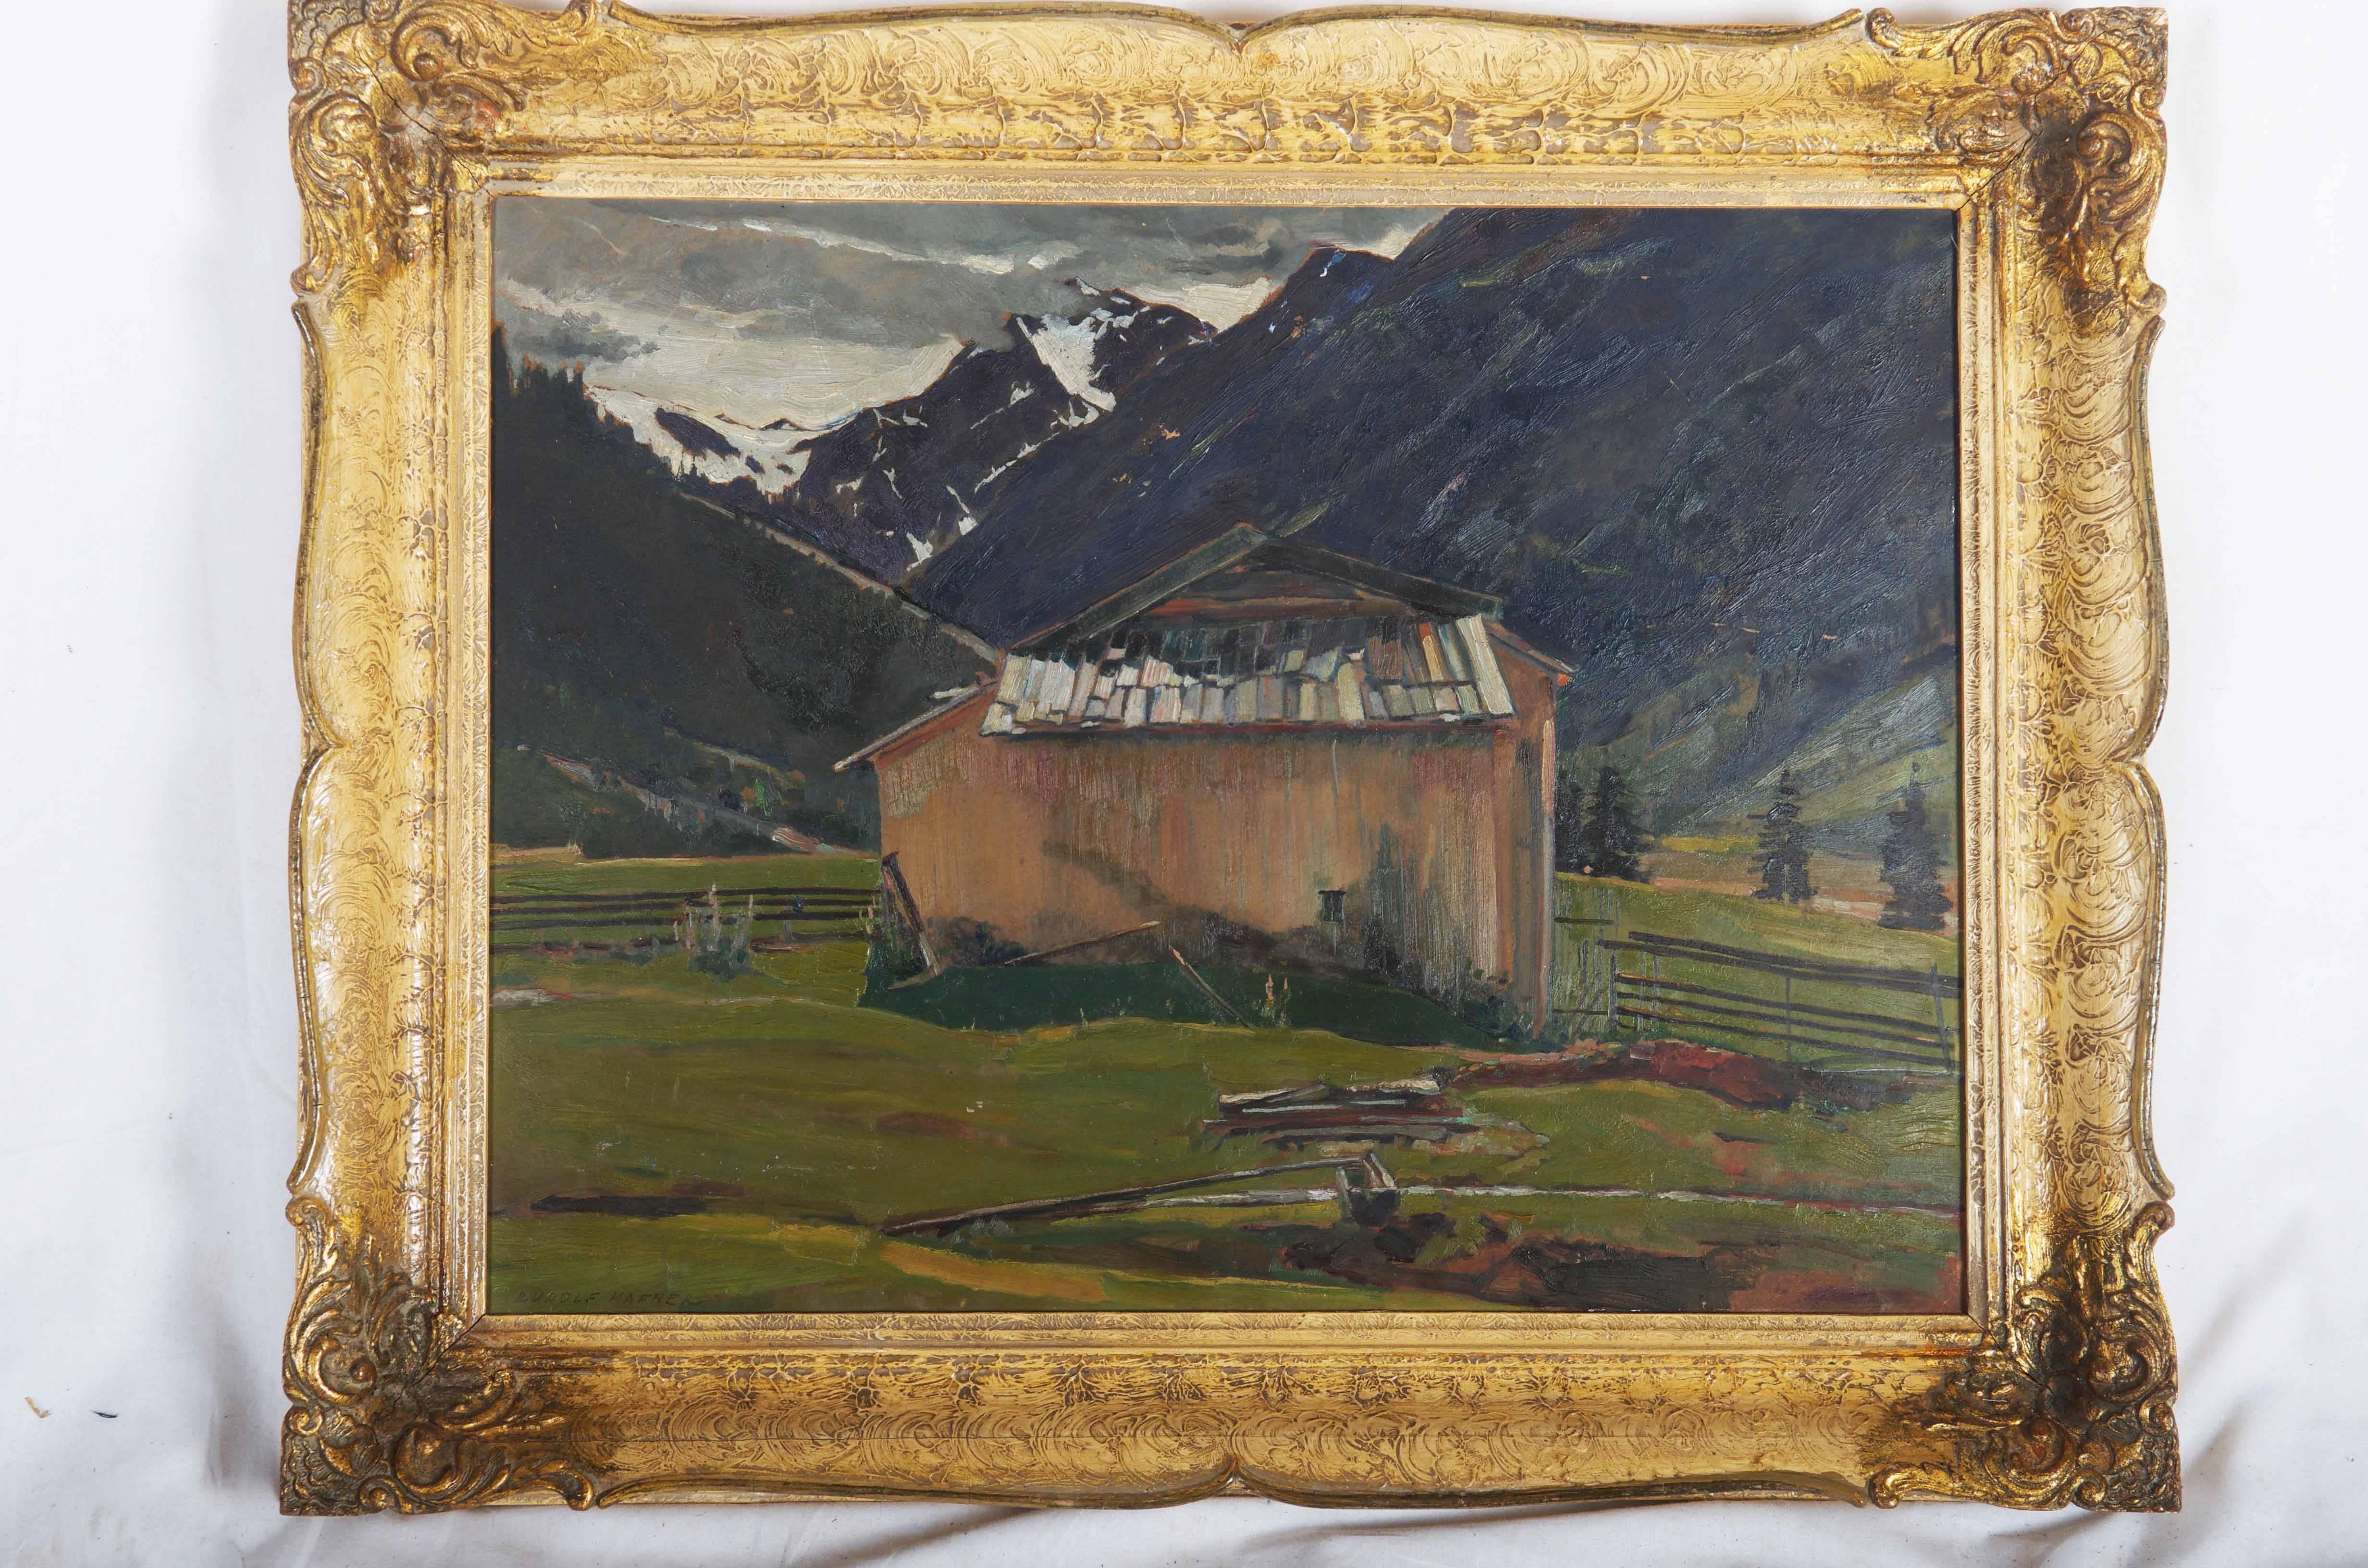 “Aus den Gschnitztal” Tyrolean landscape in spring from the late 1940s.
The painting is in very good condition, the work is signed RUDOLF HAFNER lower right. The verso bears the artists address label, inscribed by hand.
Dimension of the painting